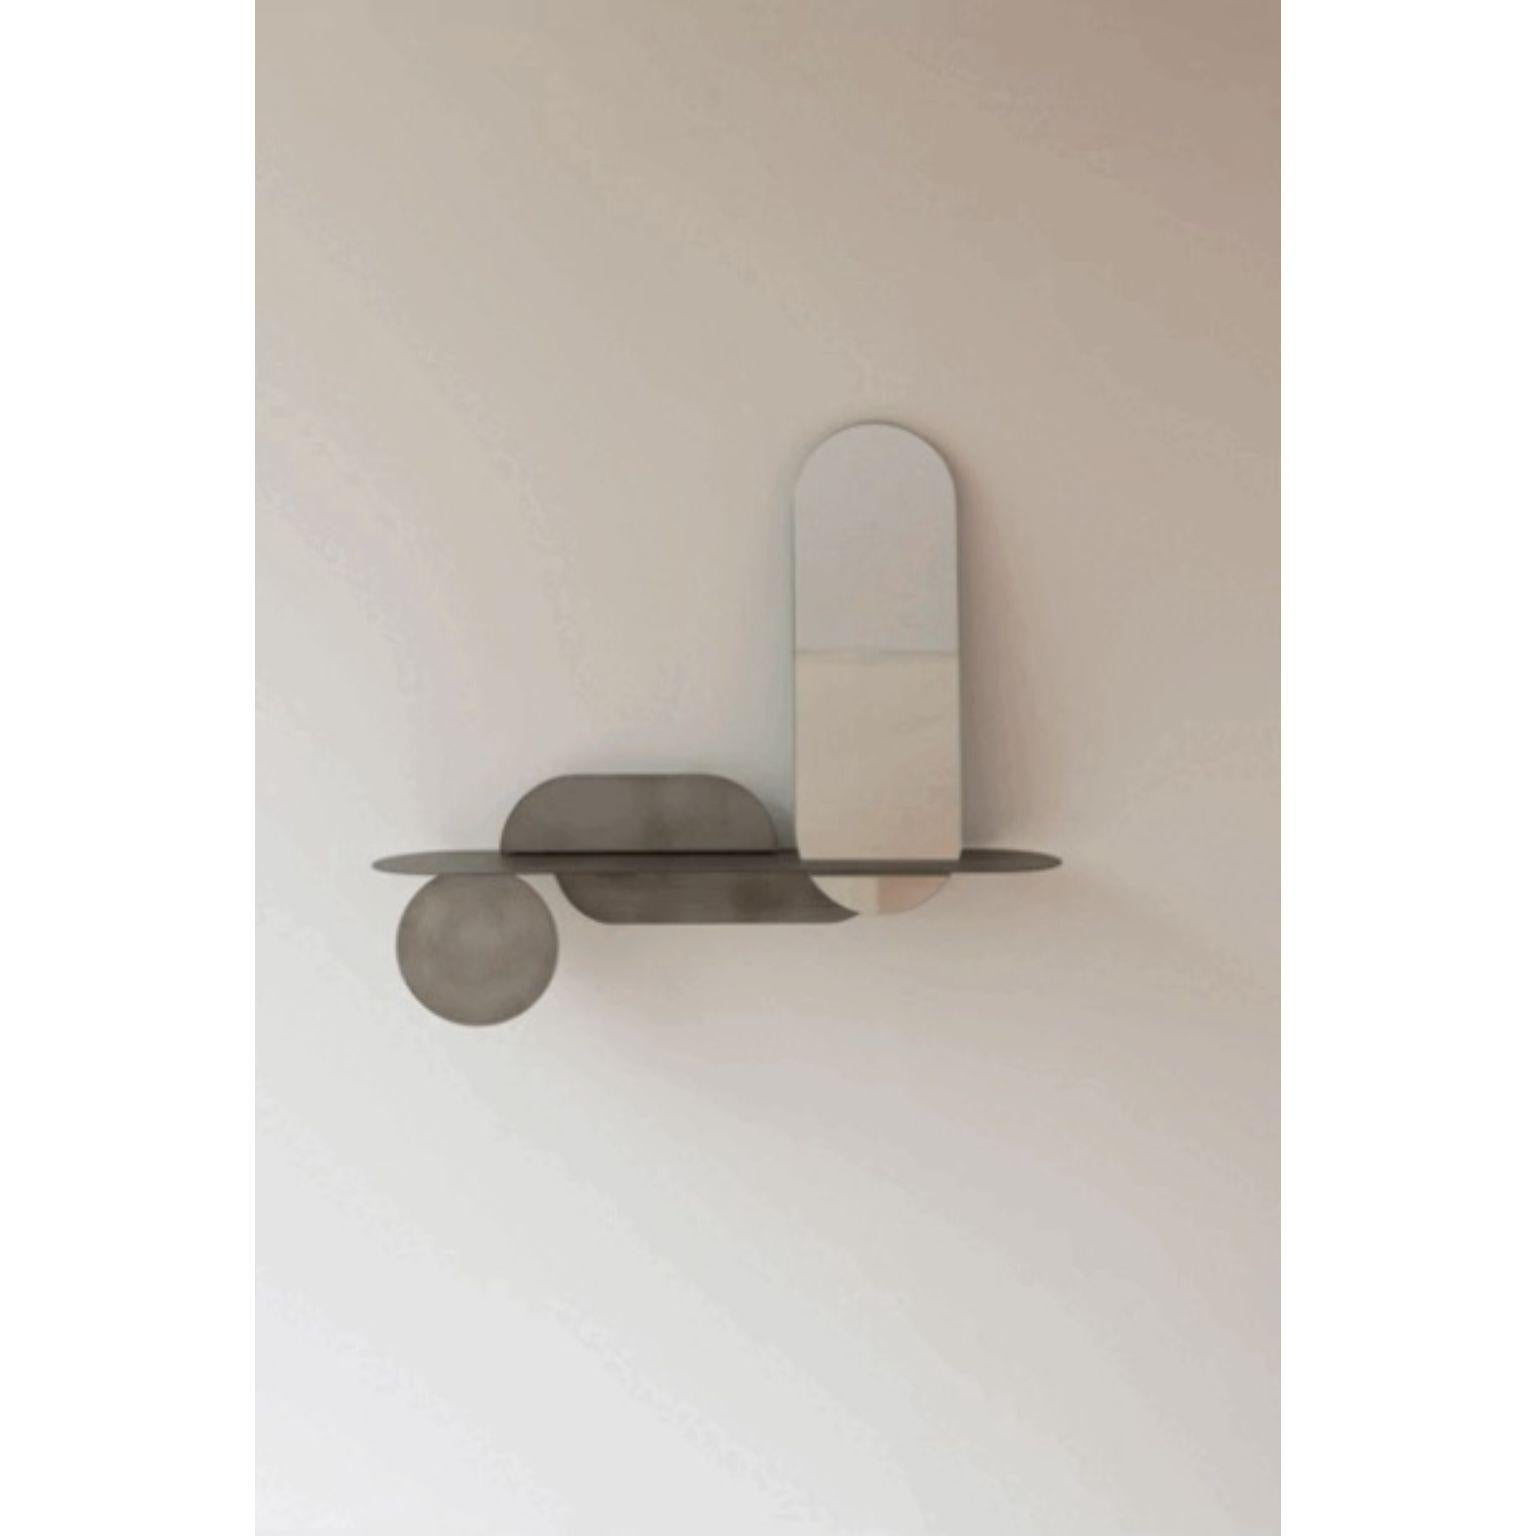 Simply Foggy Shelf With Mirror by Mademoiselle Jo
Dimensions: L 87 x W 20 cm.
Materials: Matte foggy steel and mirror.

Available in two versions and two colors. Please contact us.

Behind SIMPLY is actually a much more sophisticated object than its